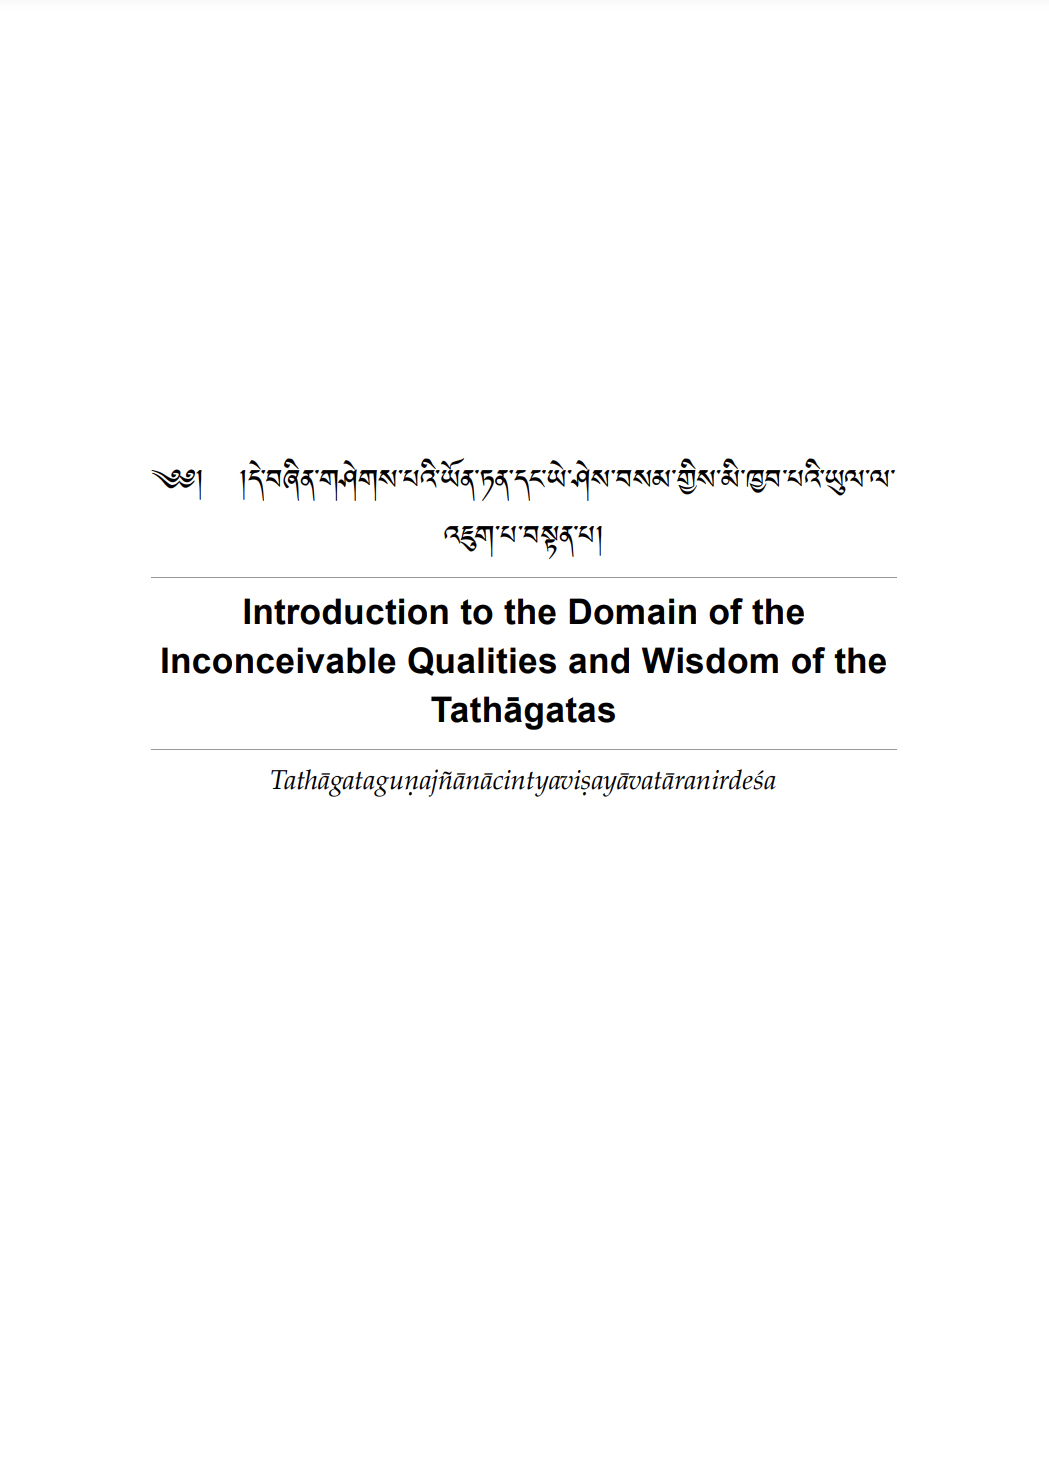 Introduction to the Domain of the Inconceivable Qualities and Wisdom of the Tathāgatas Liljenberg K.-front.jpg